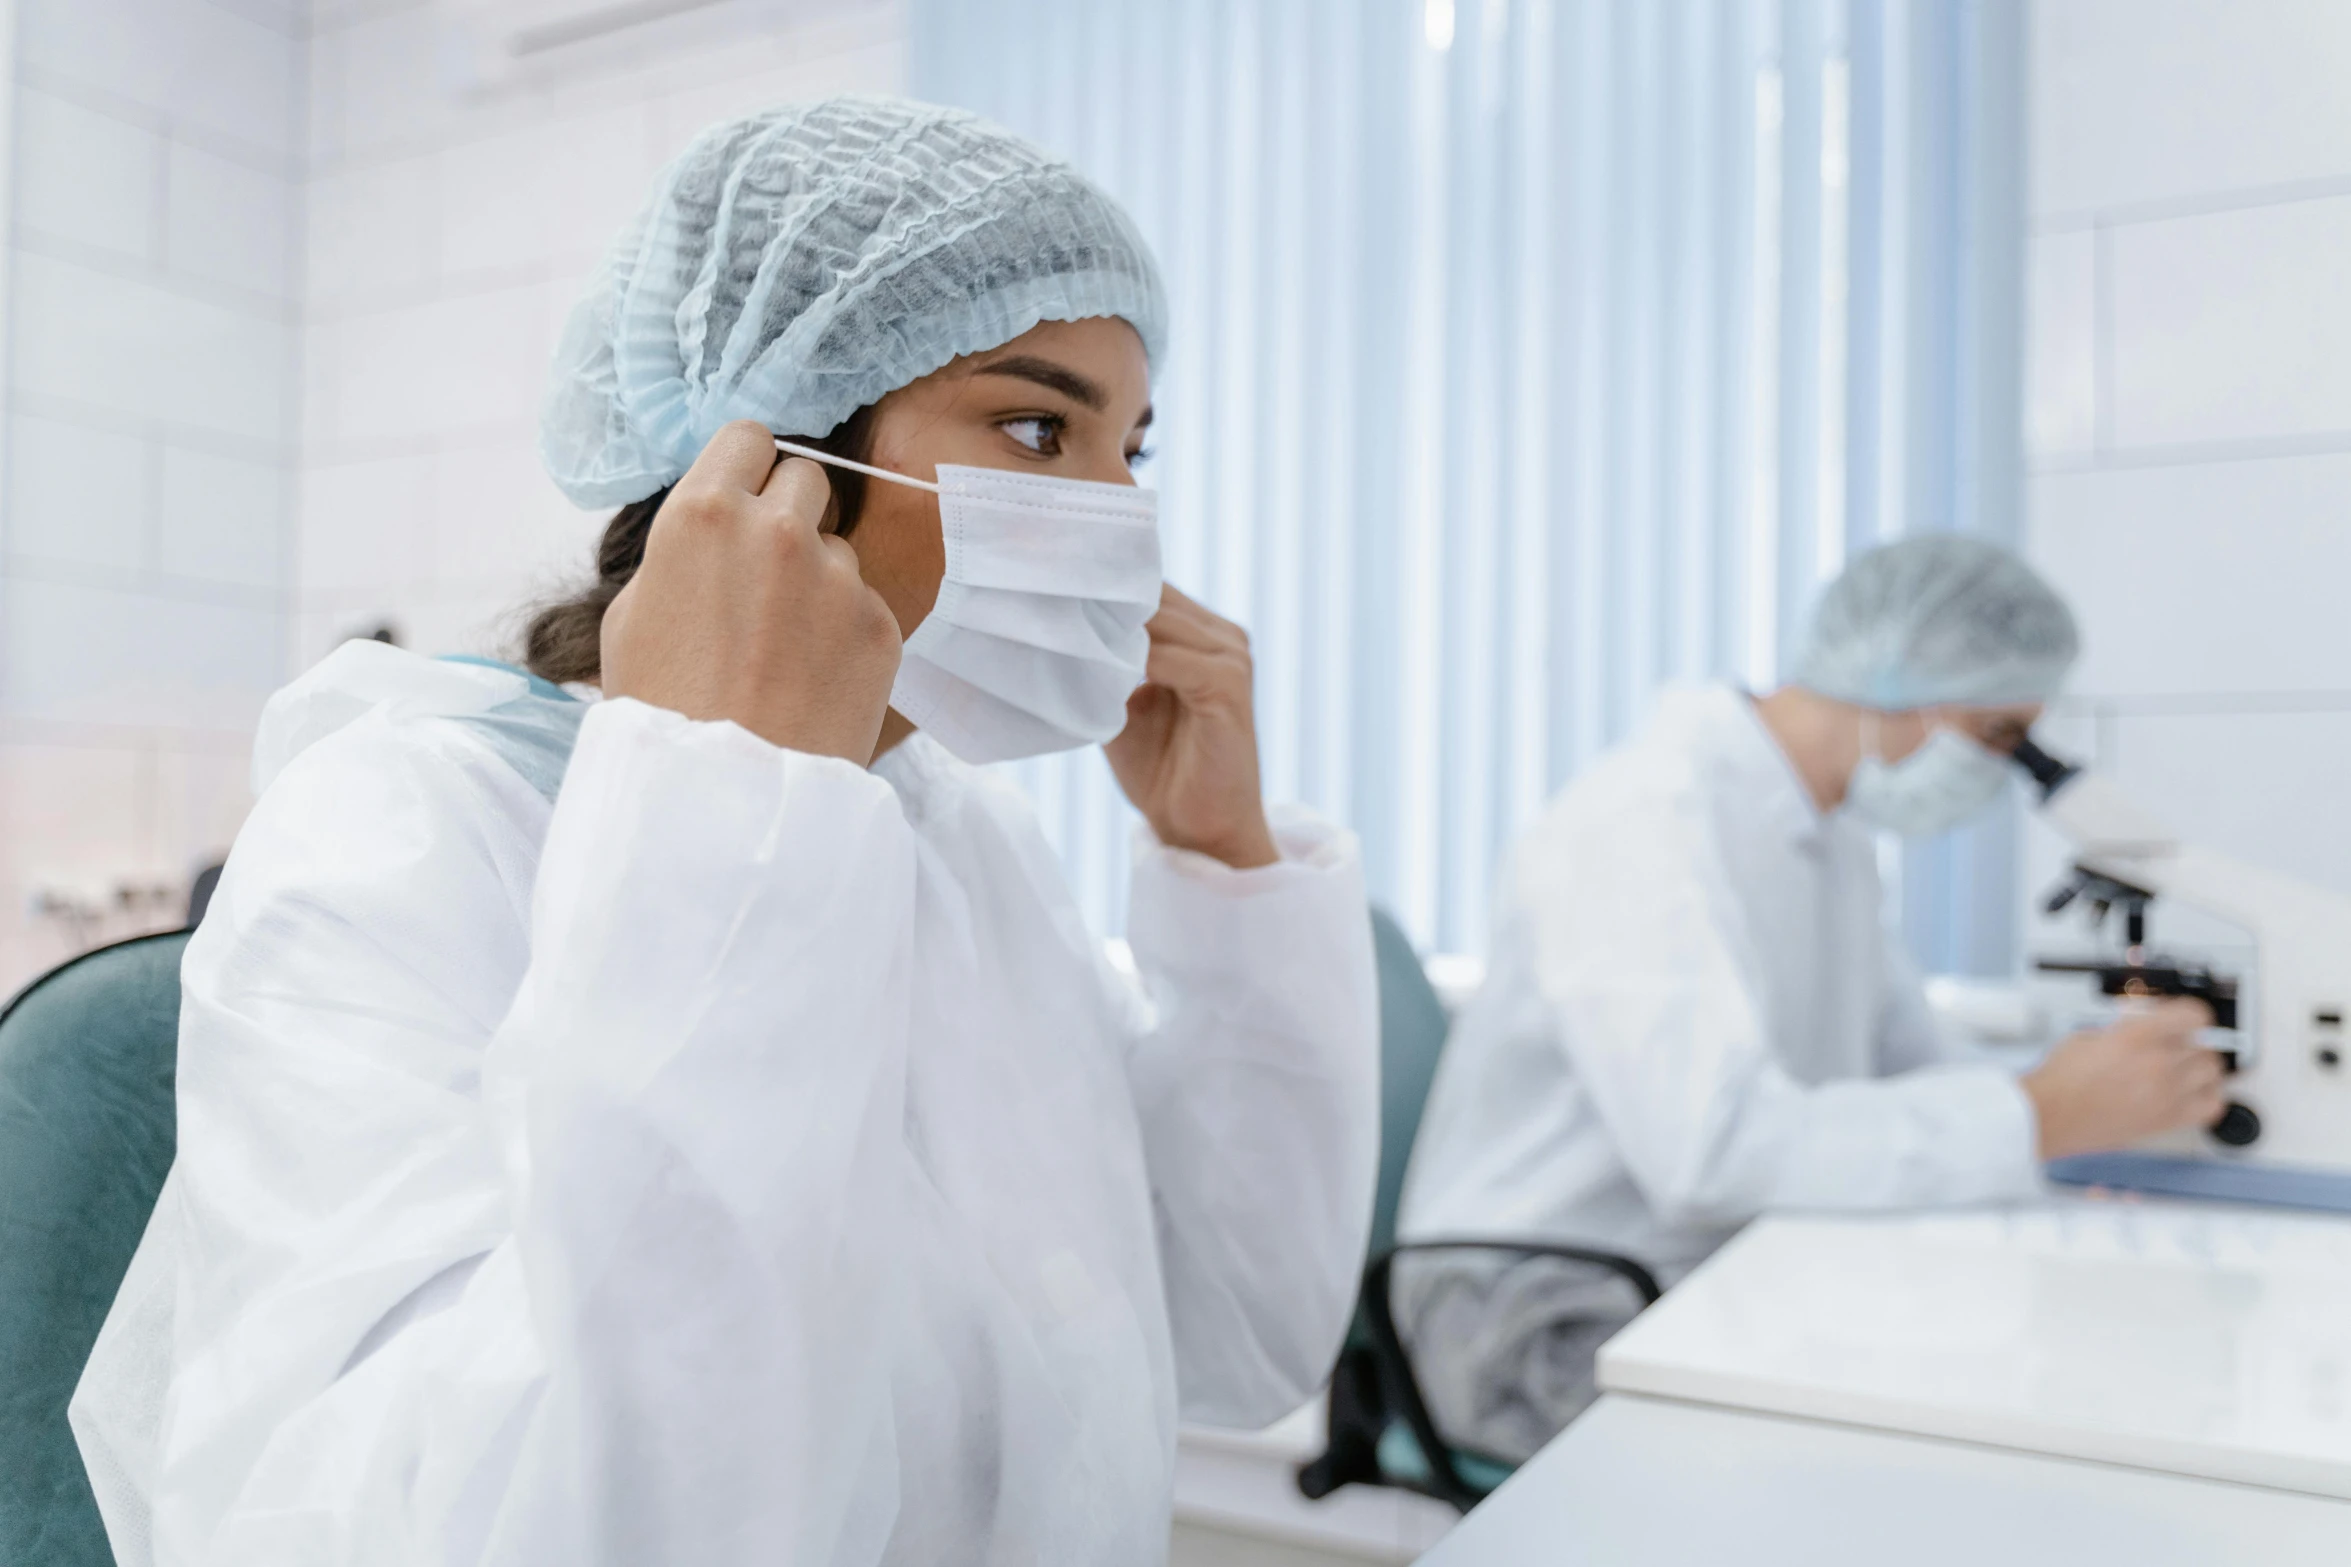 two people in sterile garb working at work